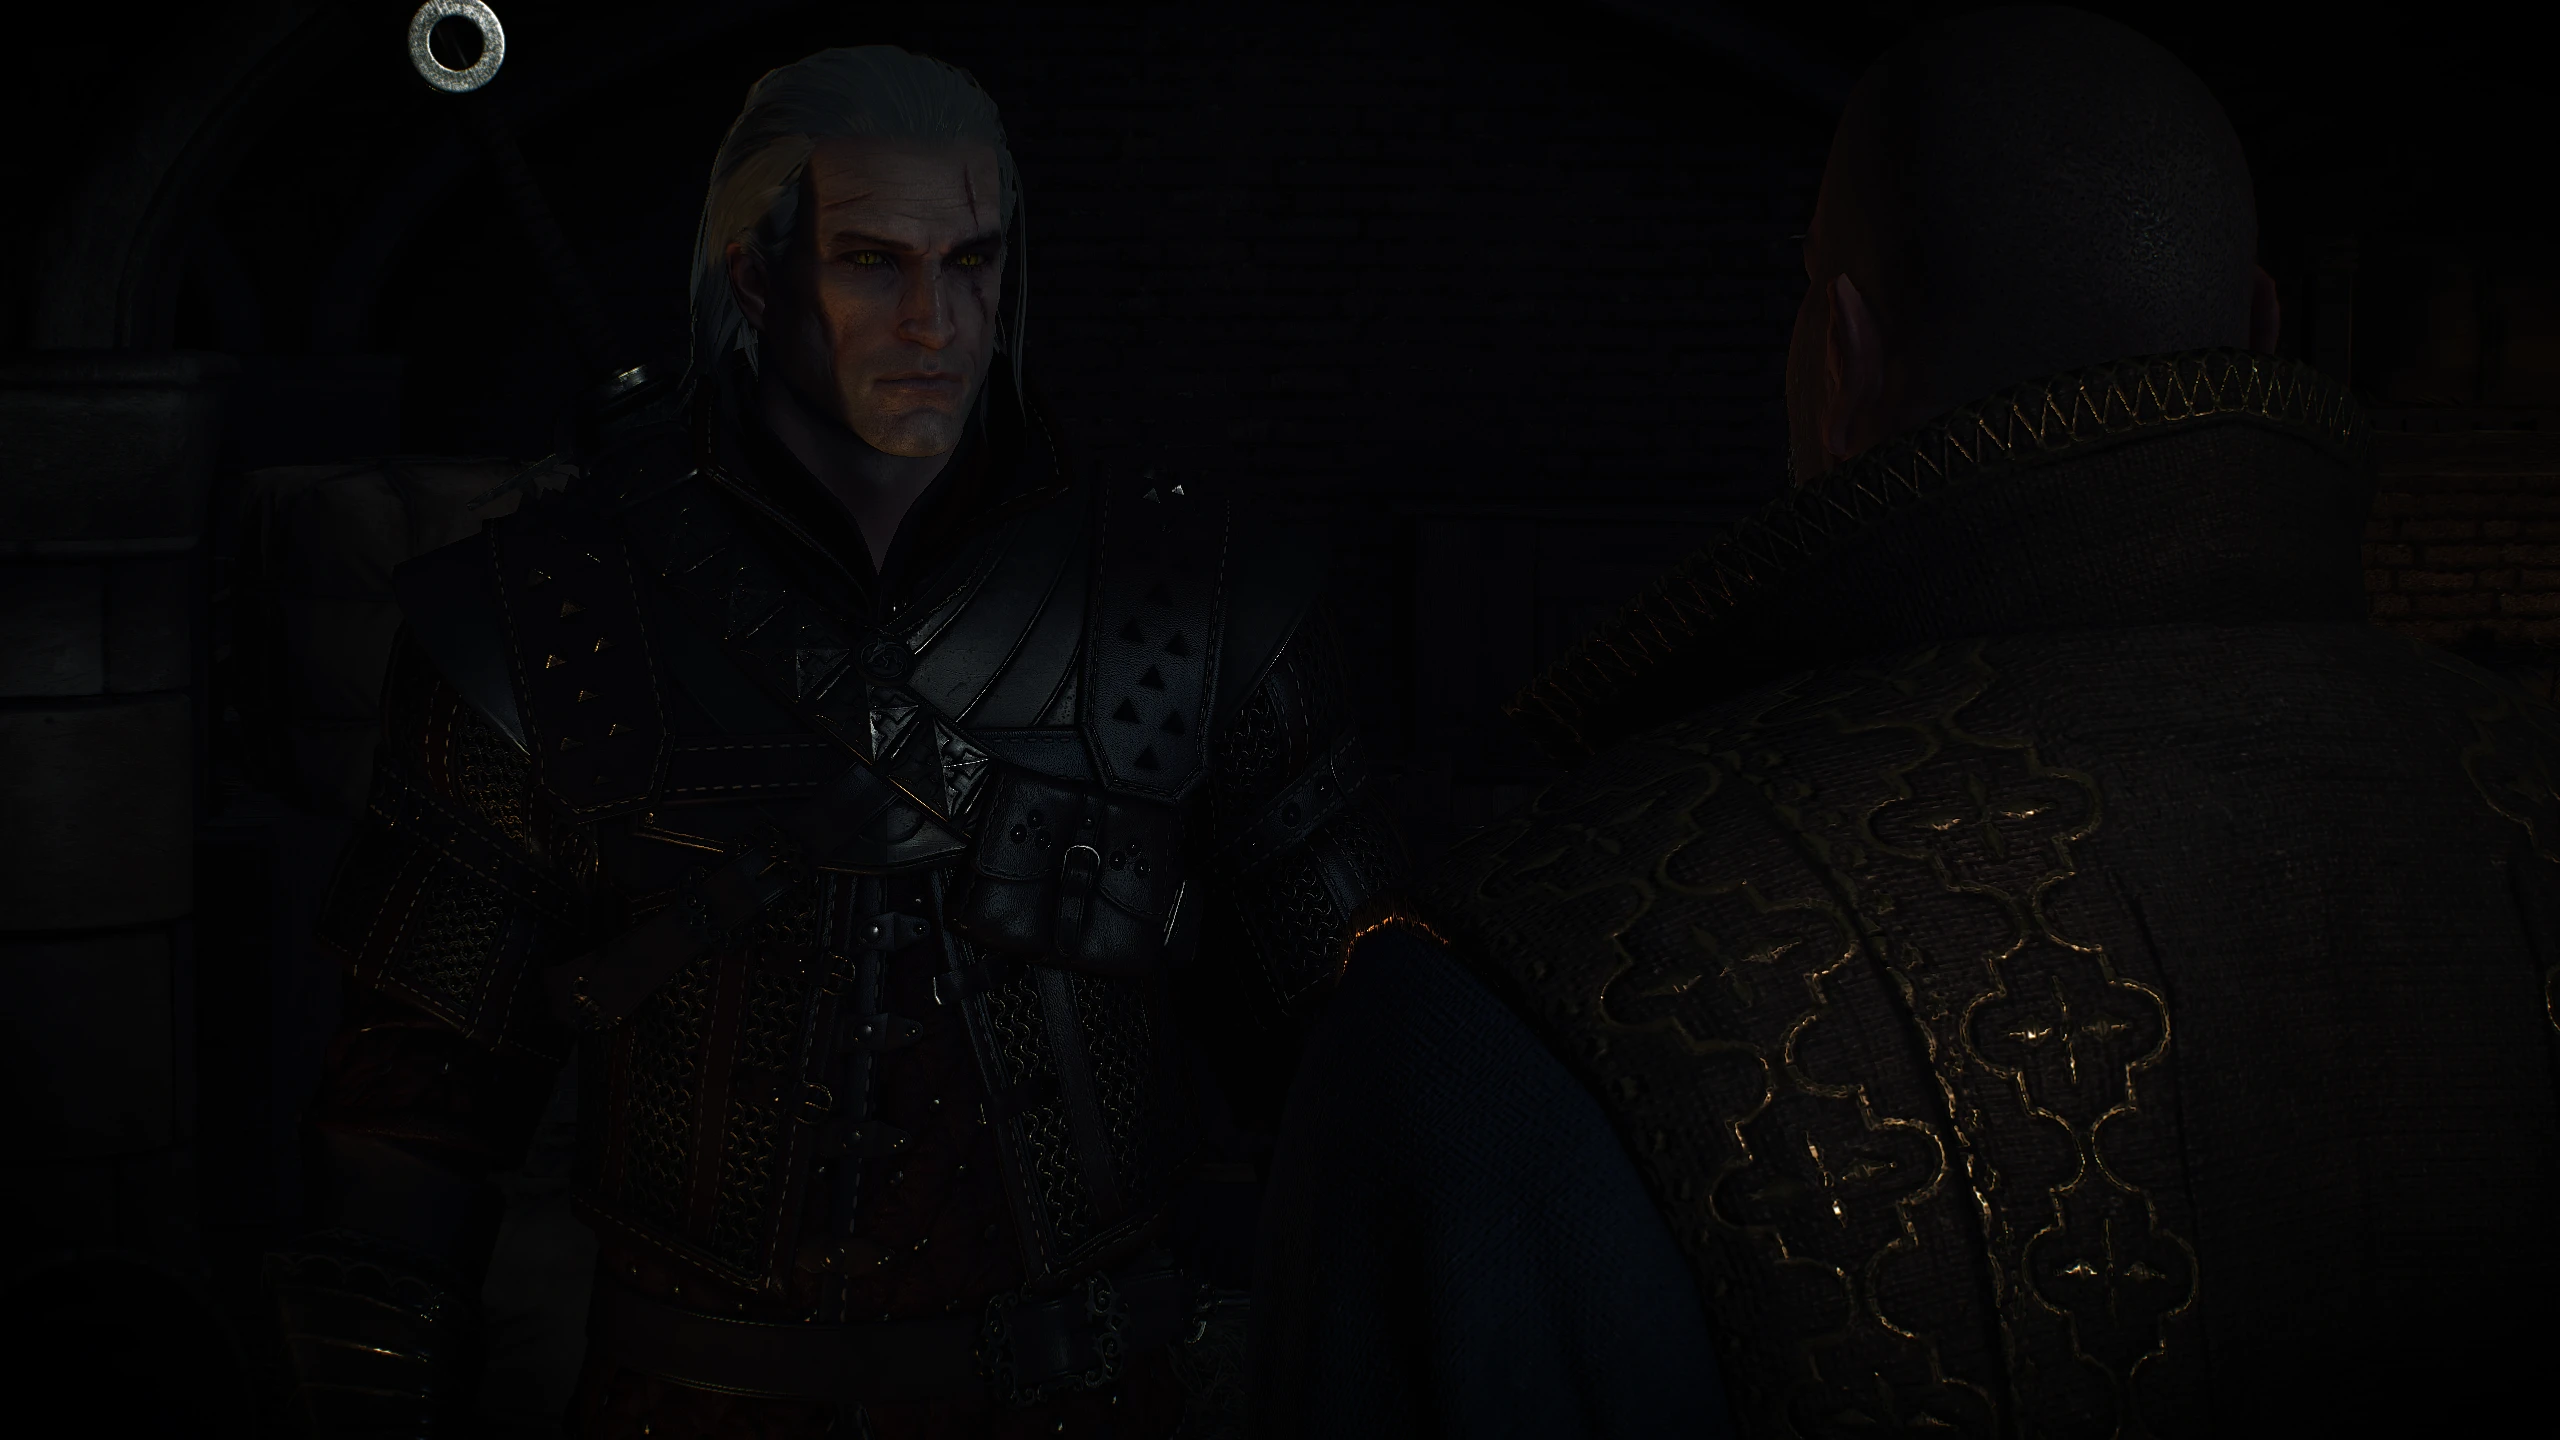 decisions wild at heart witcher 3